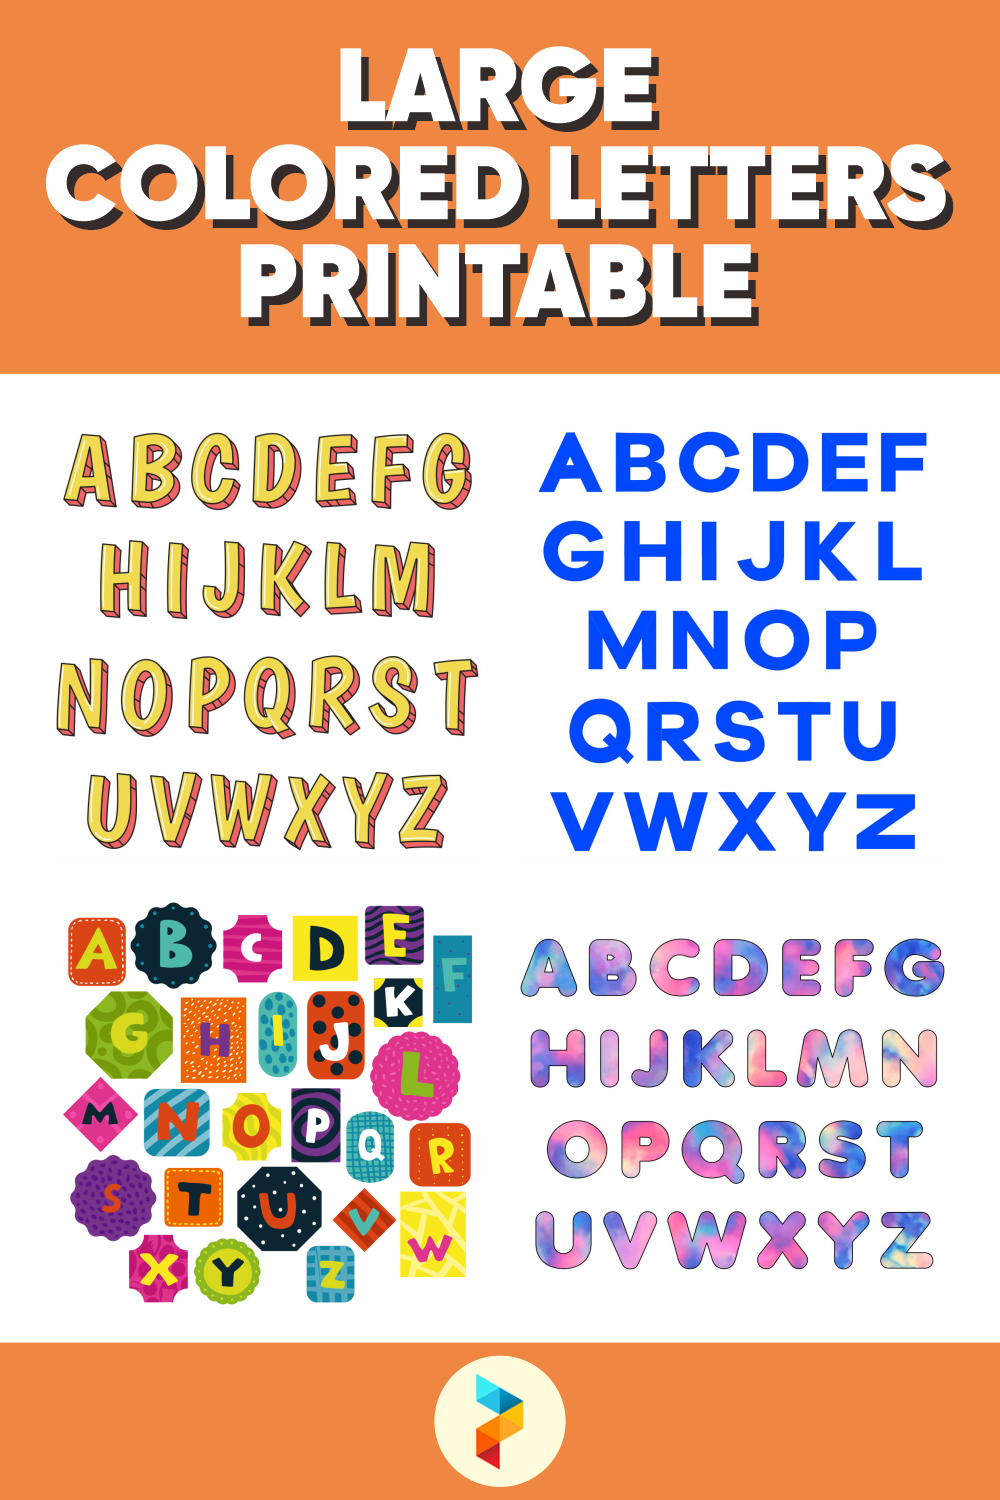 Large Colored Letters Printable